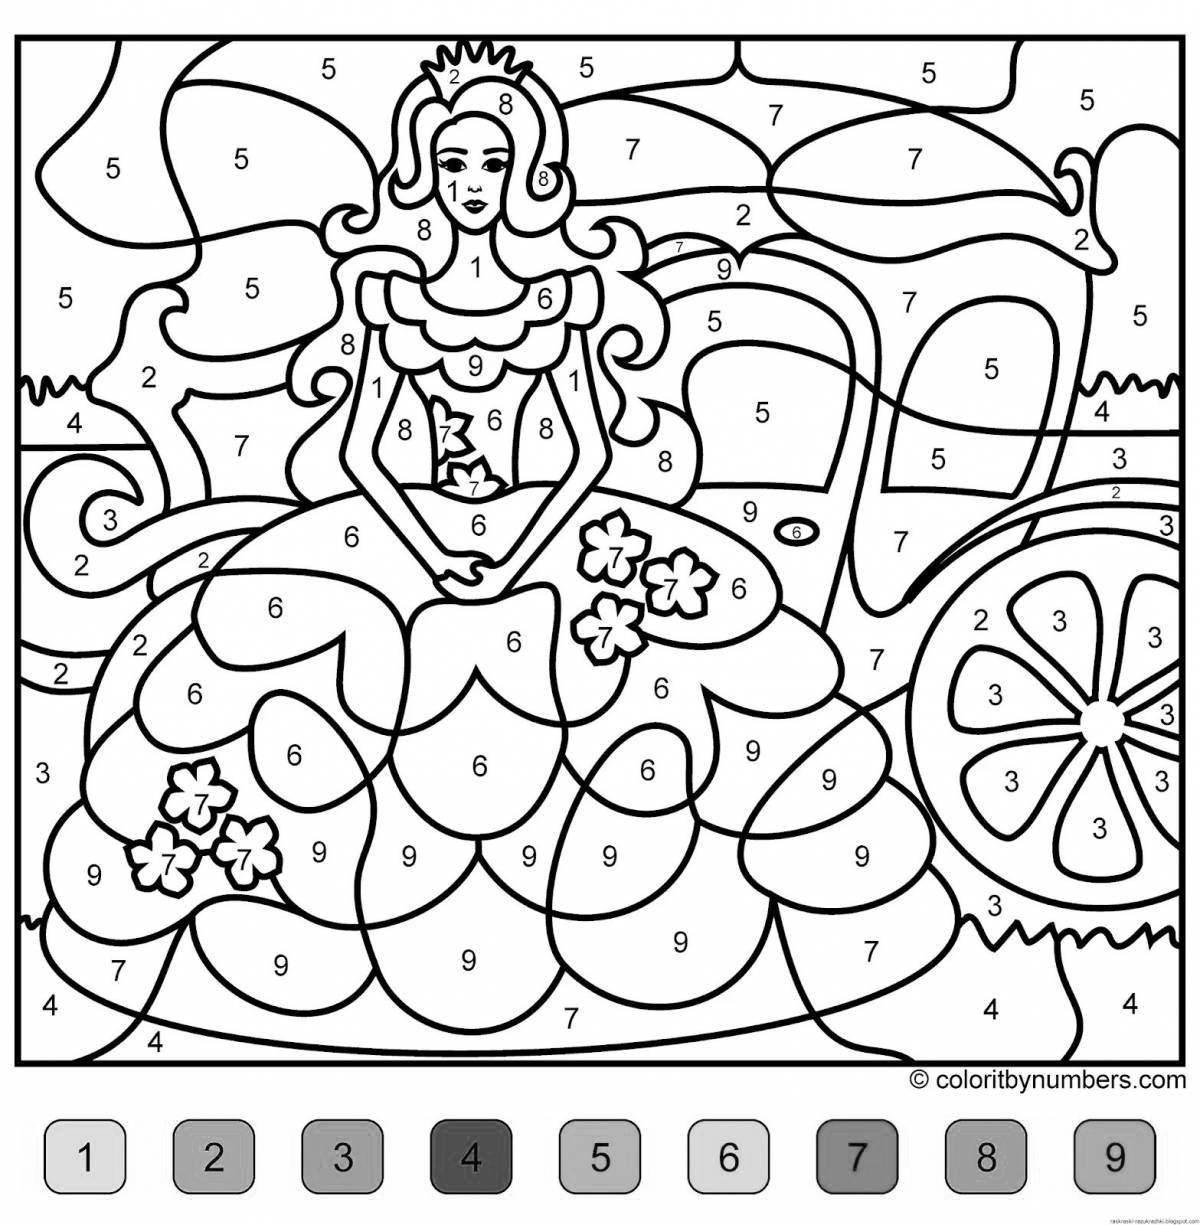 Fabulous coloring book for 8-9 year olds